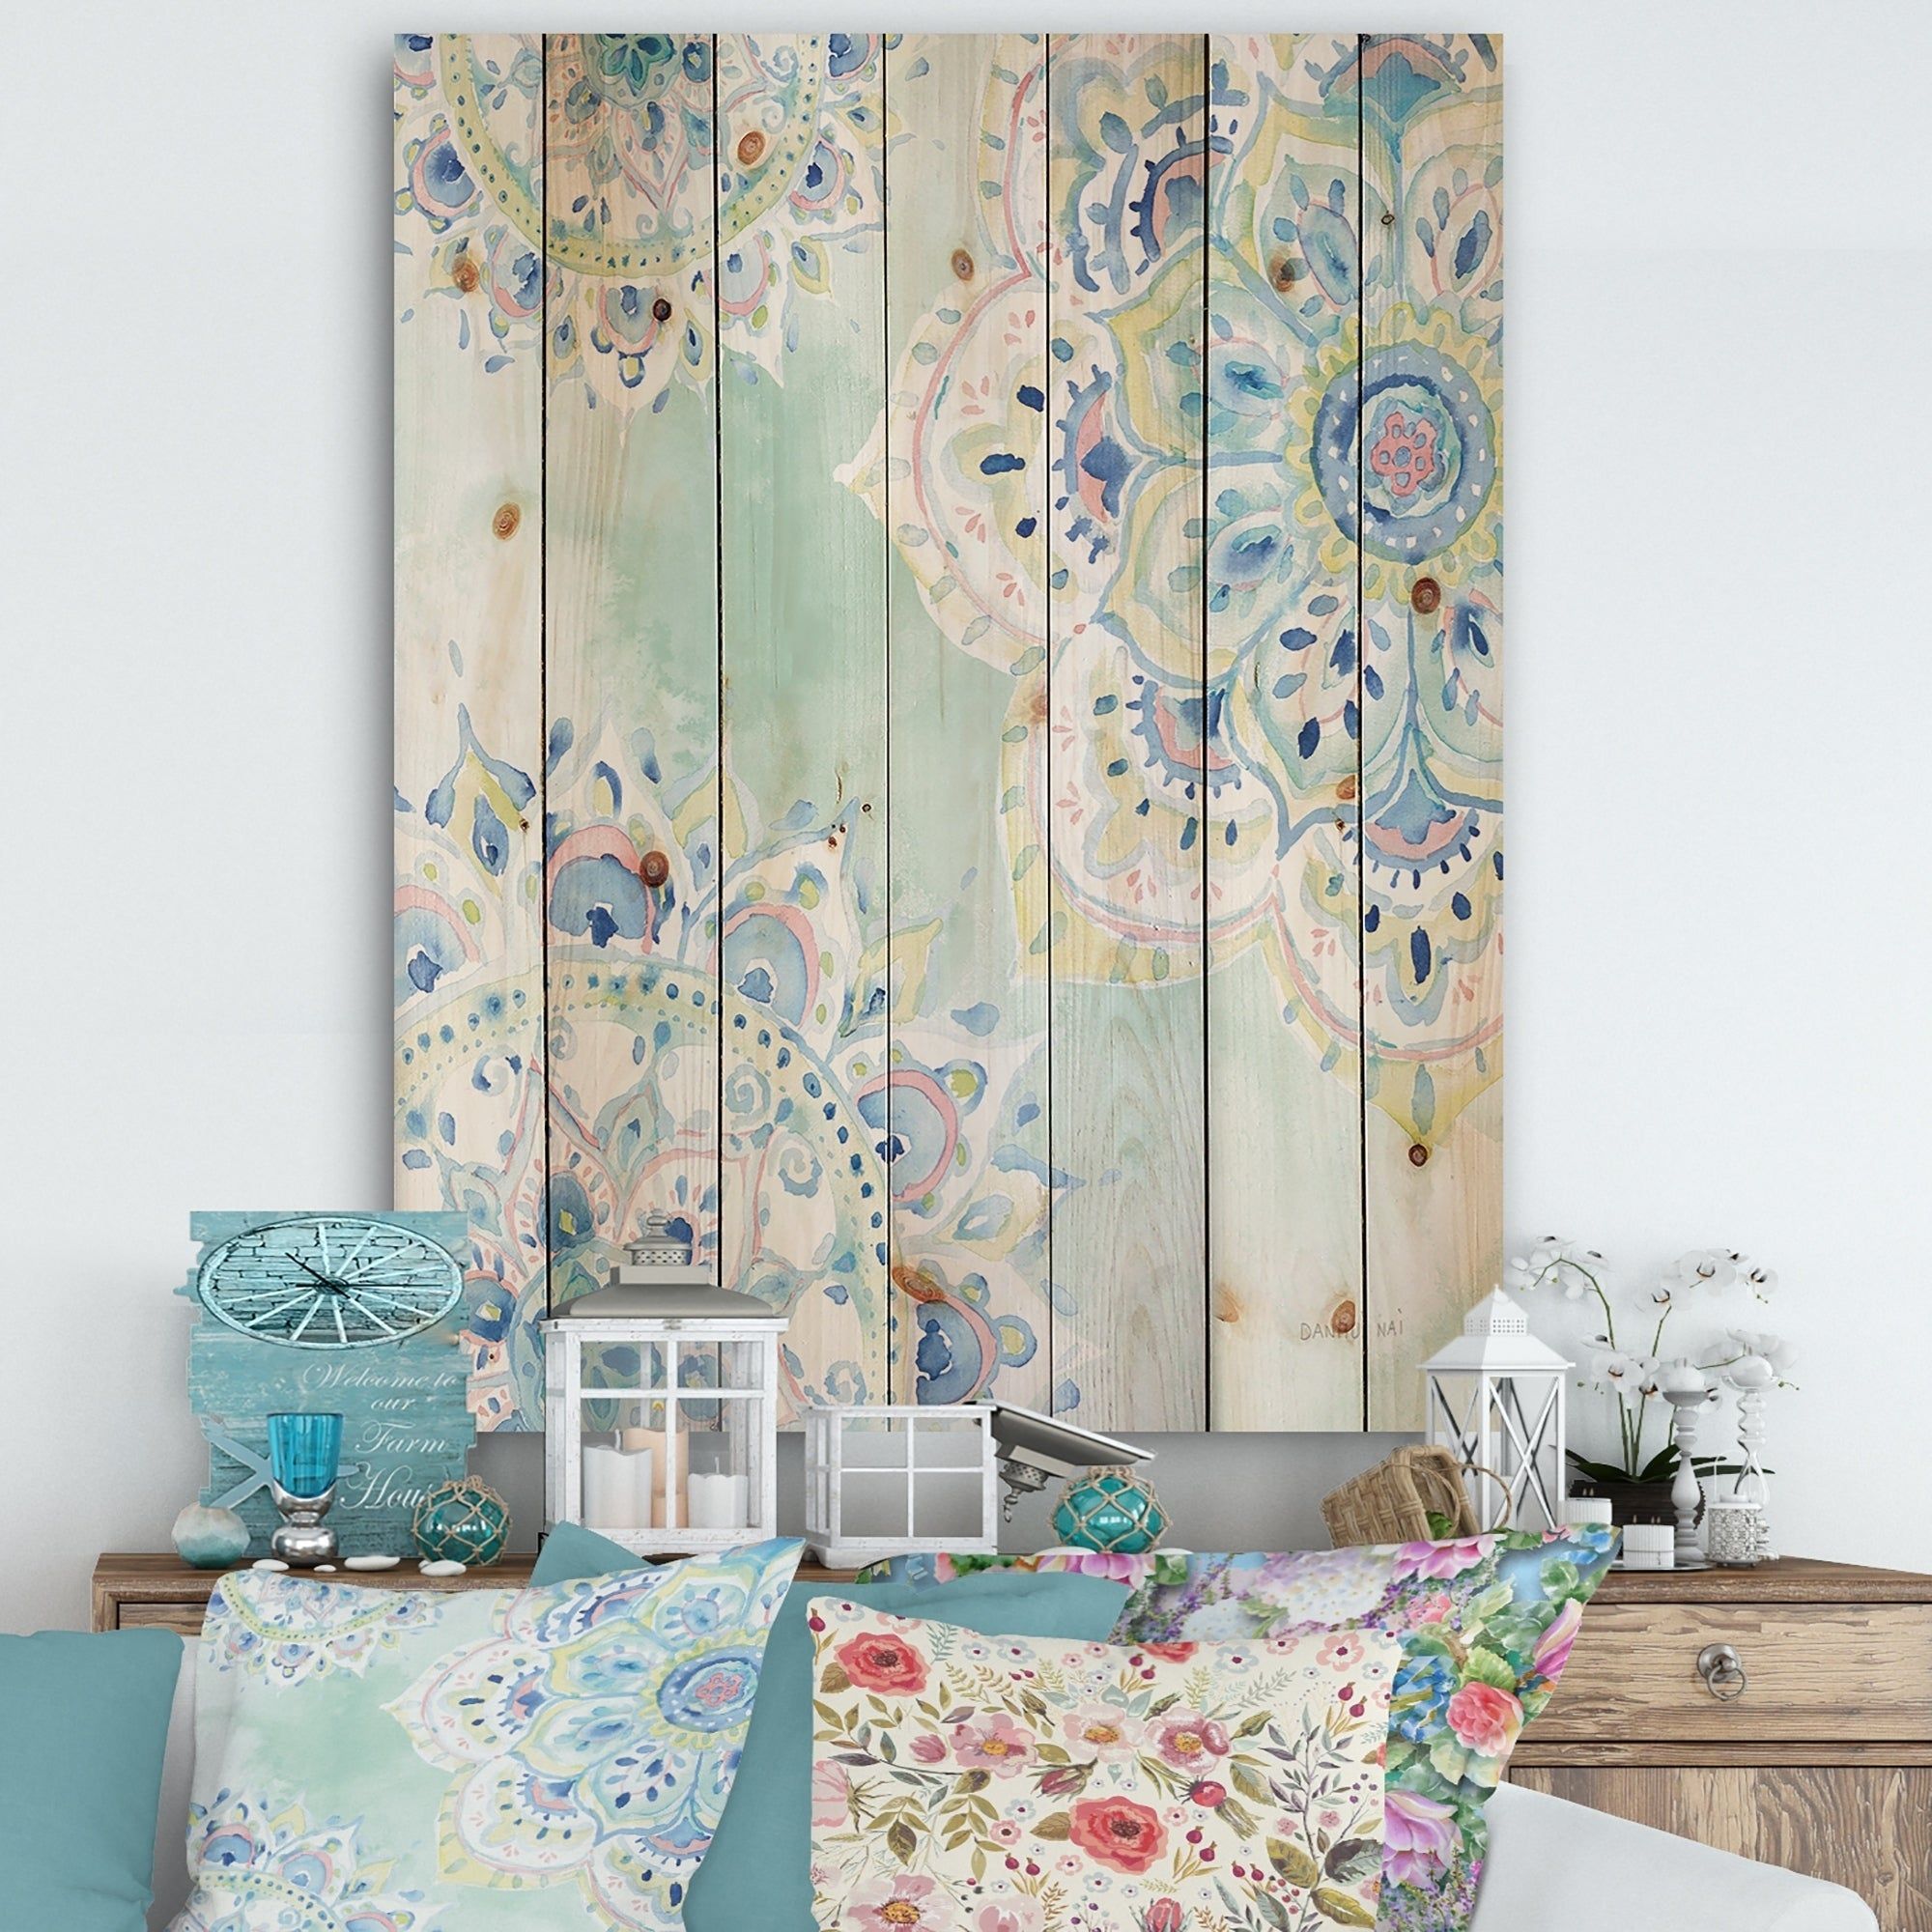 Floral Wood Wall Art | Find Great Art Gallery Deals Shopping Regarding 3 Piece Magnolia Brown Panel Wall Decor Sets (View 30 of 30)